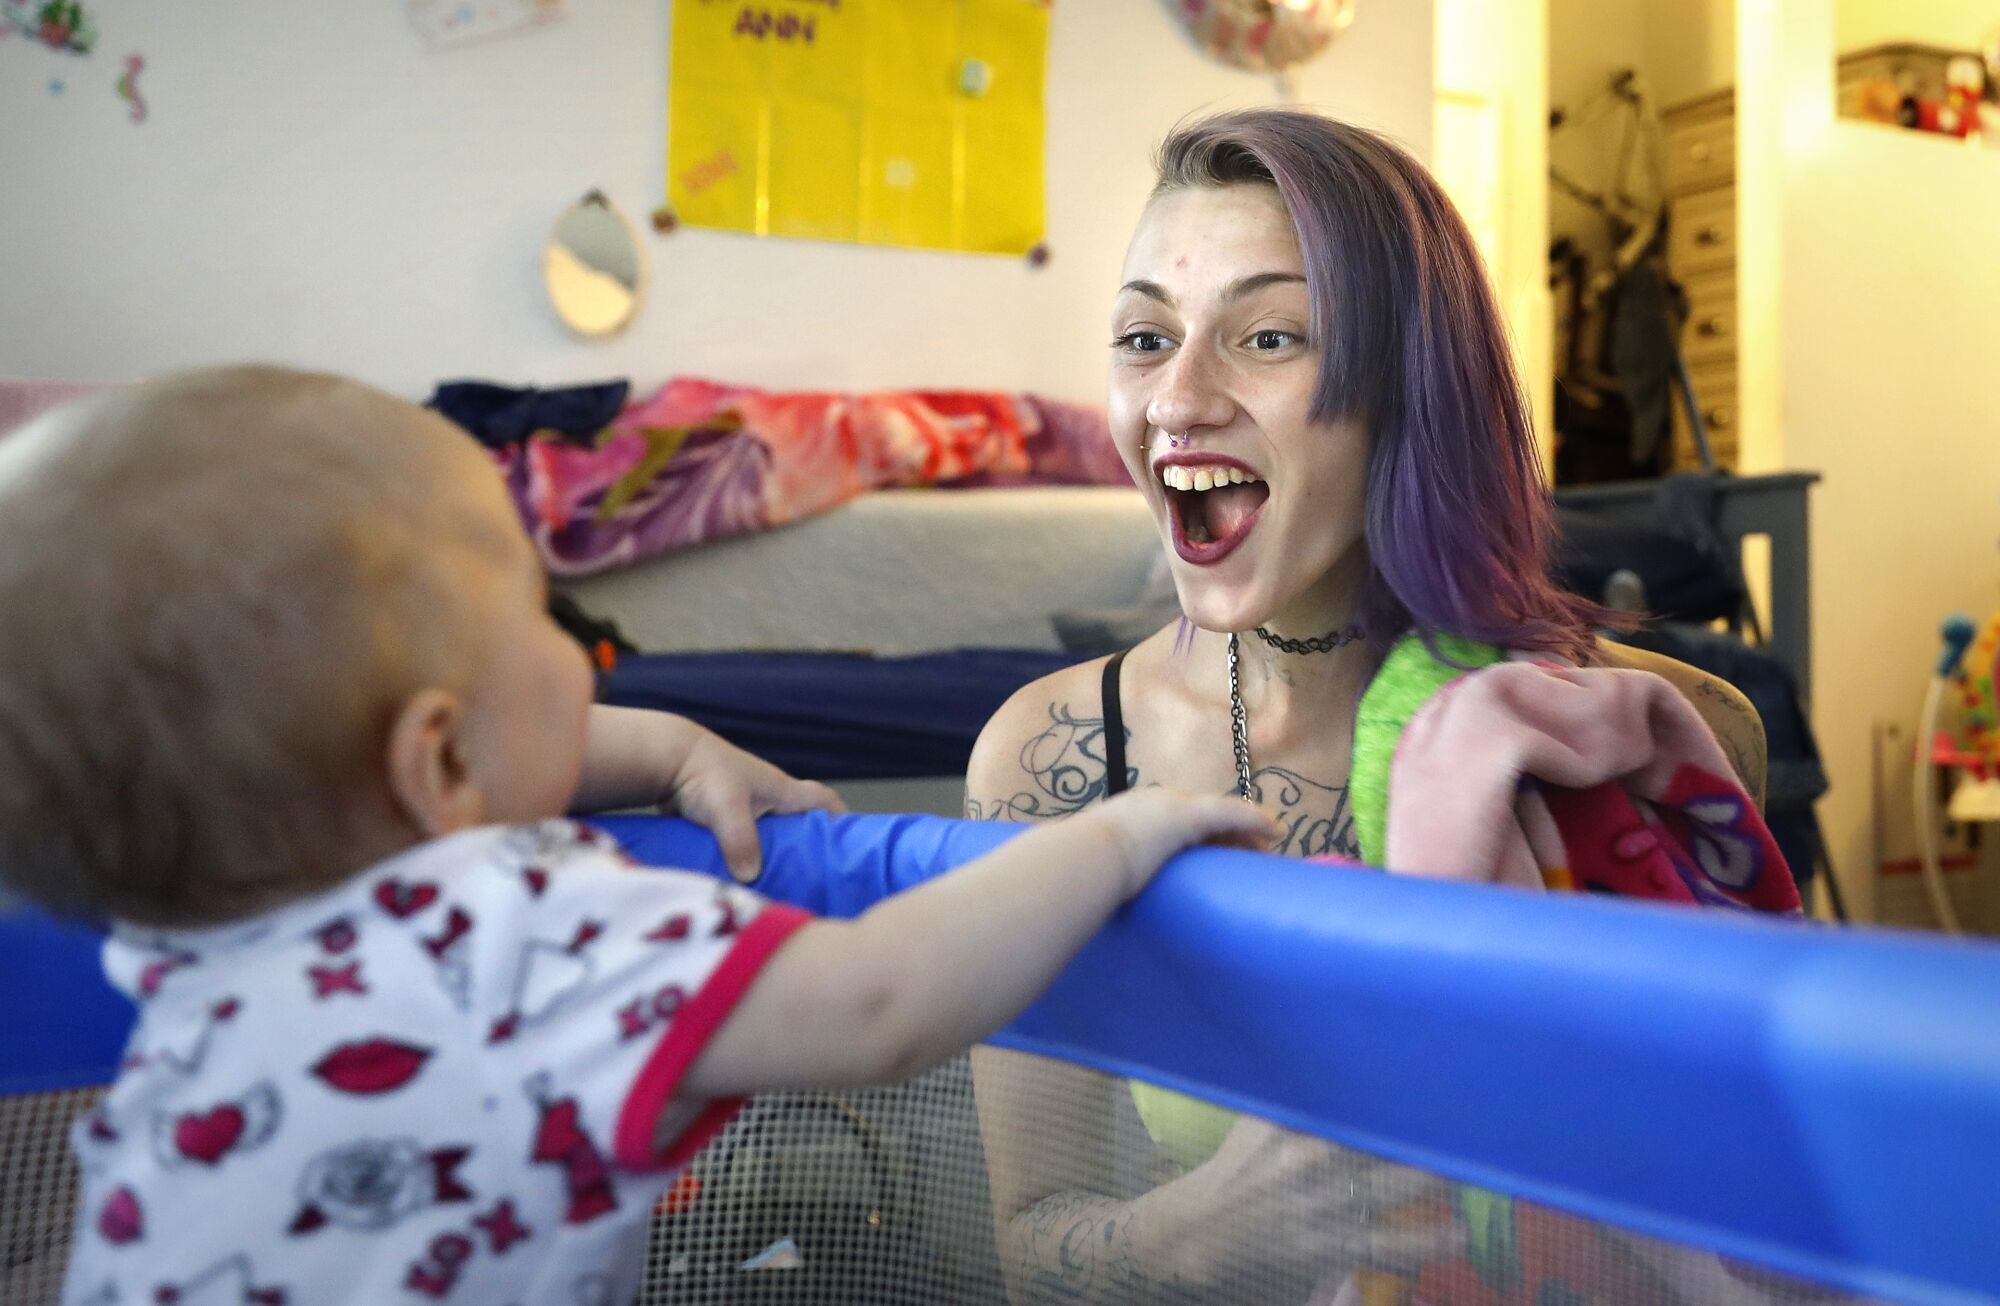 A woman smiling with an open mouth at a baby who is inside a playpen.